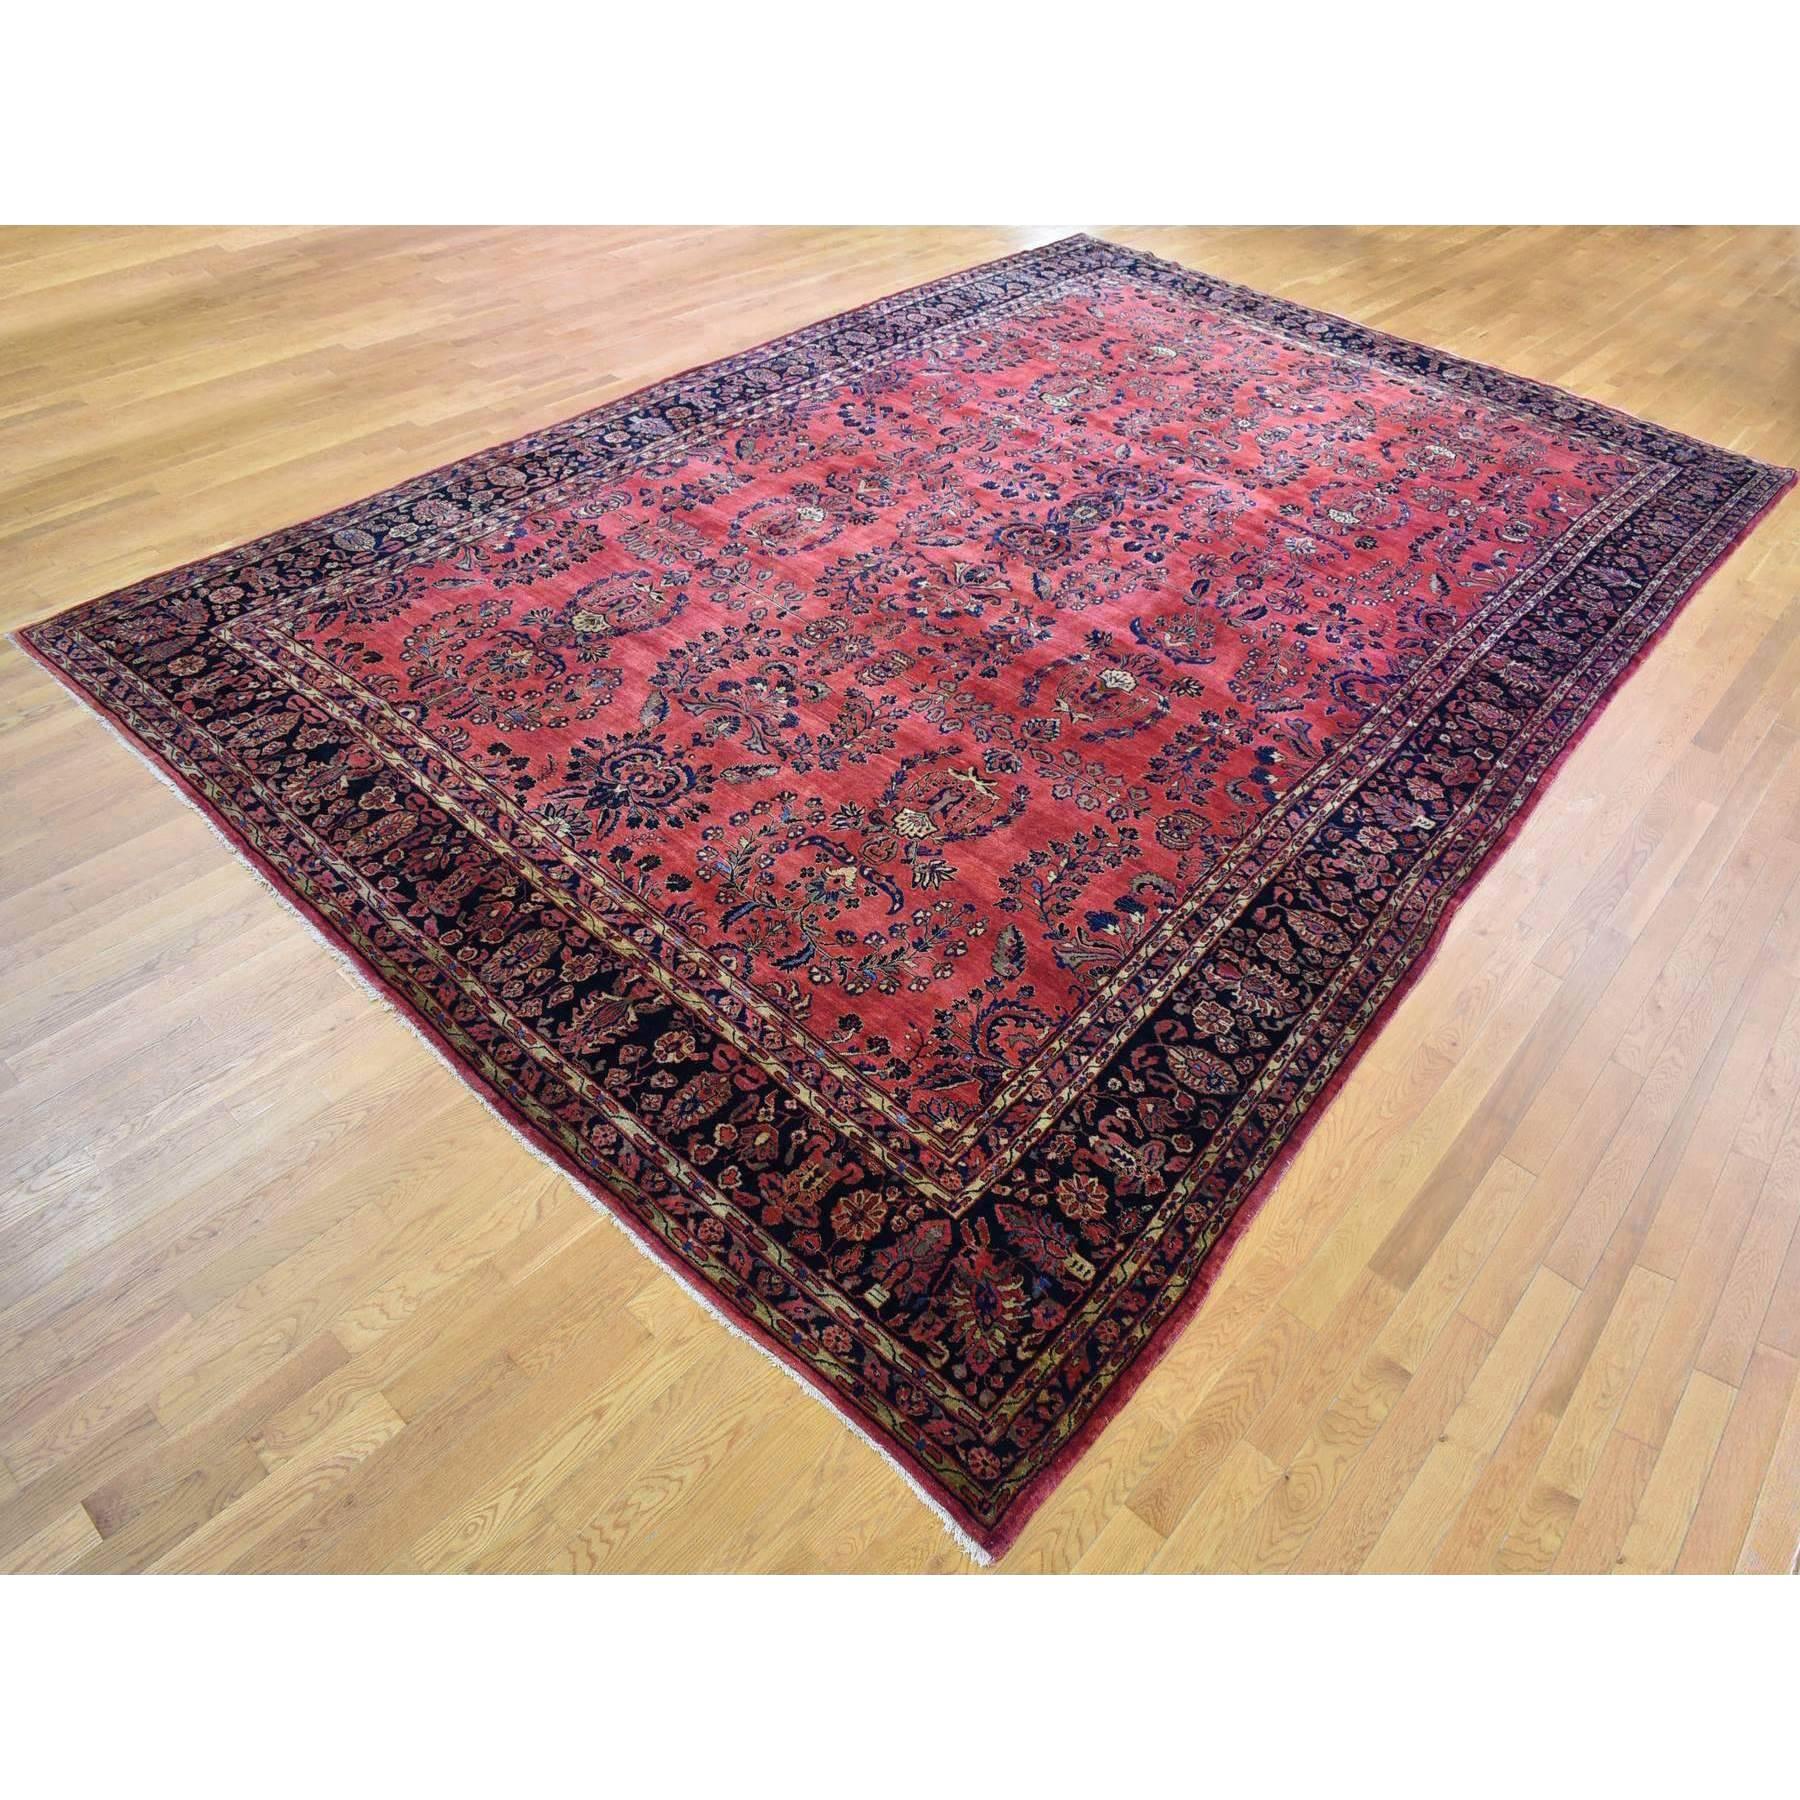 Sarouk Farahan Oversized Red Antique Persian Moharajan Sarouk Full Pile Hand Knotted Wool Rug For Sale